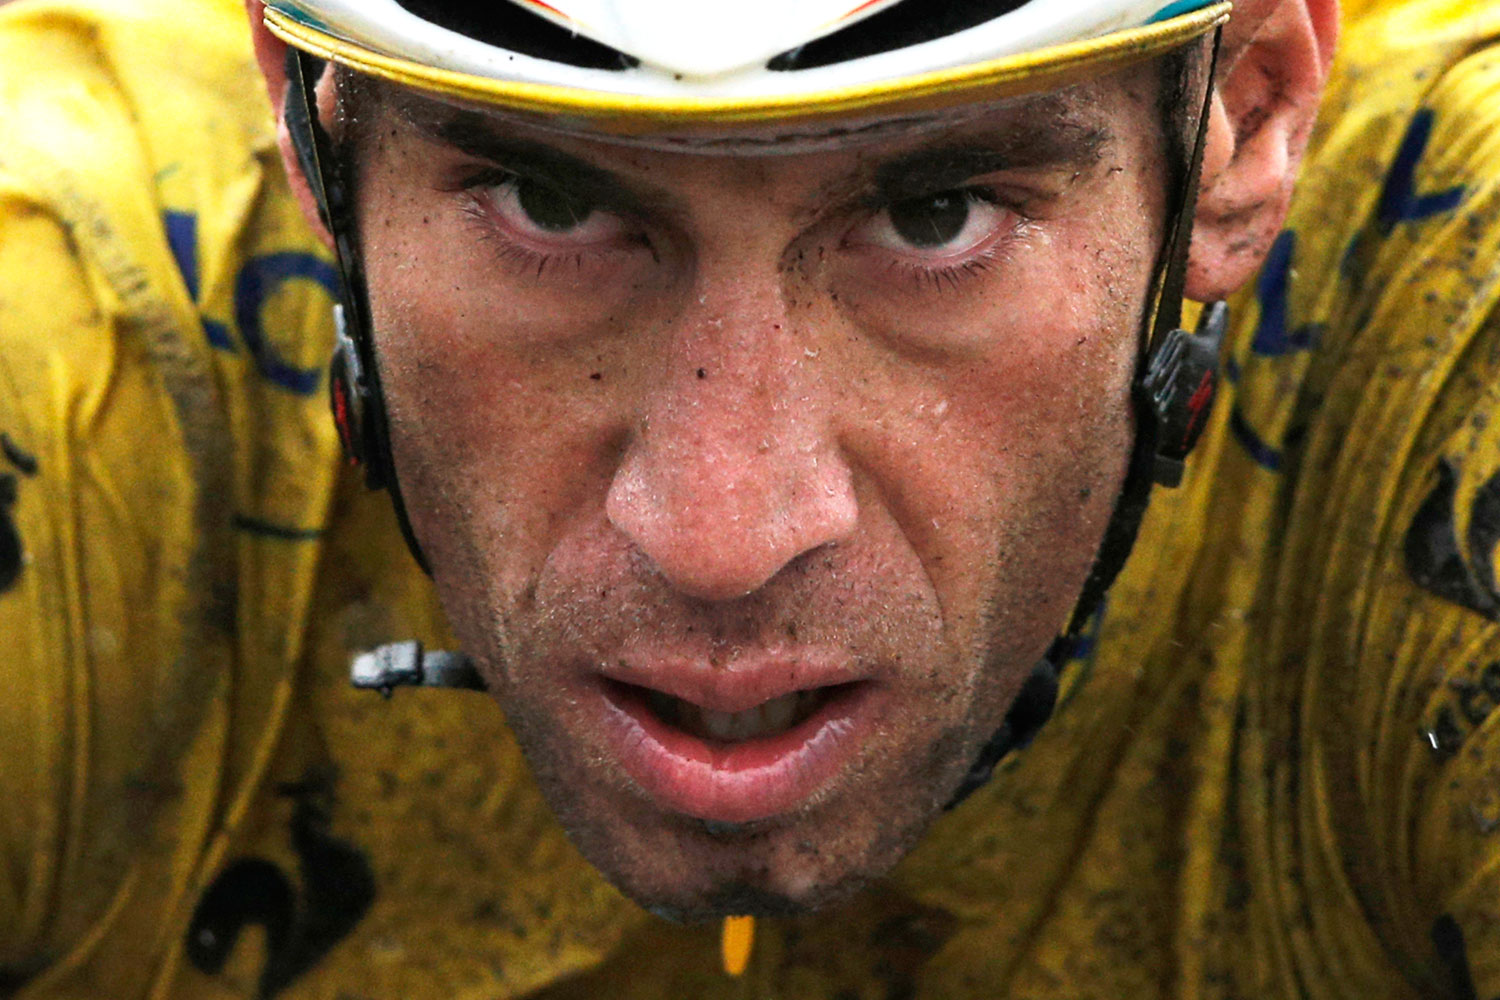 Italy's Vincenzo Nibali, wearing the overall leader's yellow jersey, crosses the finish line of the fifth stage of the Tour de France cycling race in Arenberg, France, on July 9, 2014.